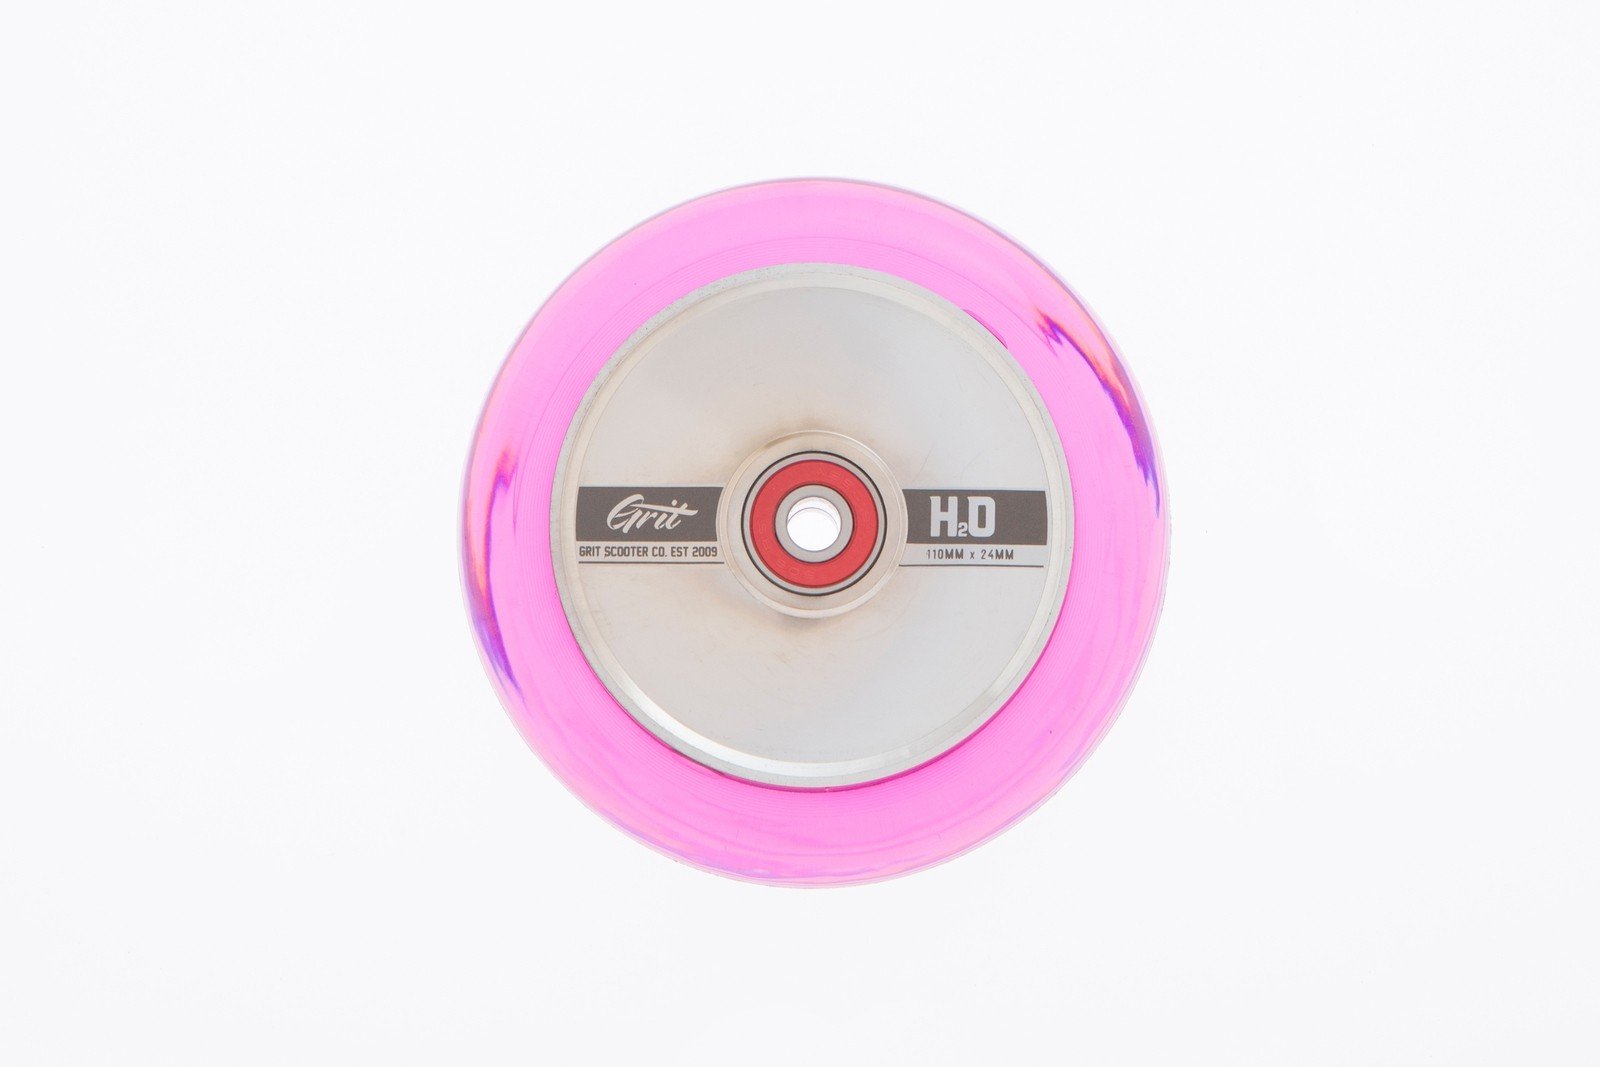 Grit Scooters Hollow Core Wheels H2O 110mm x 24mm Silver / Pink (Pair)